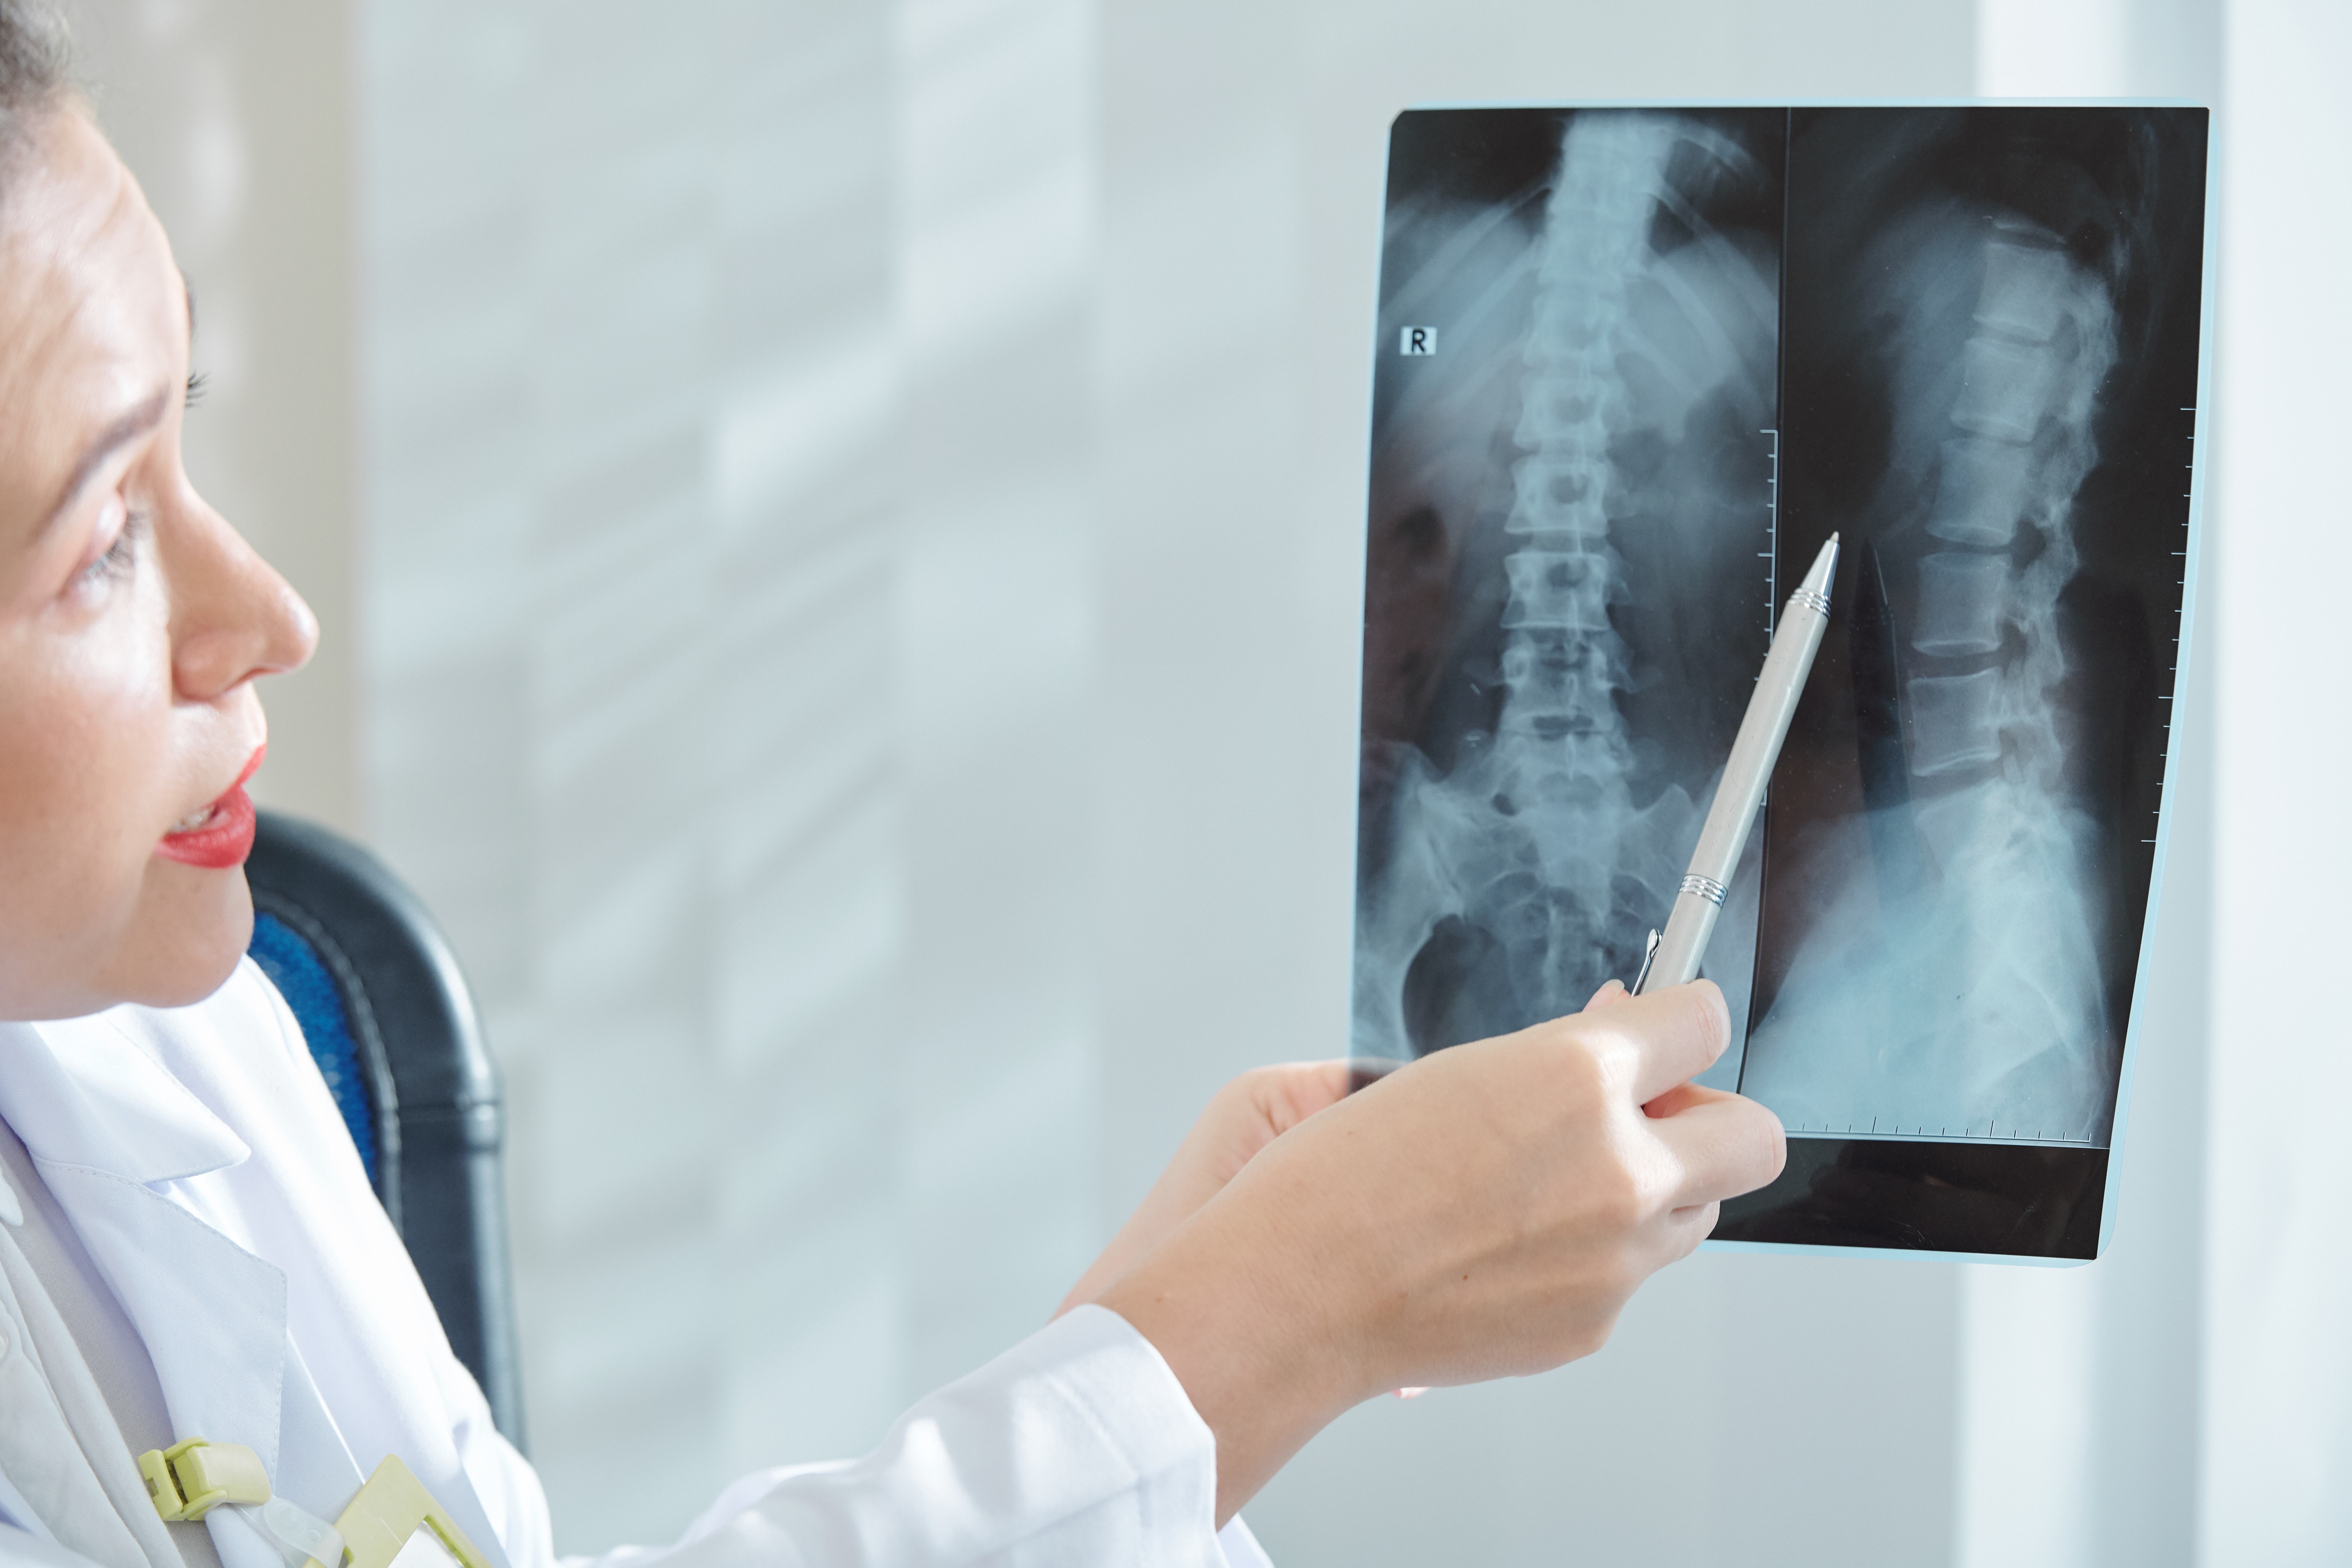 back pain treatment in pune|Spine clinic in pune|Best spine surgeon in pune